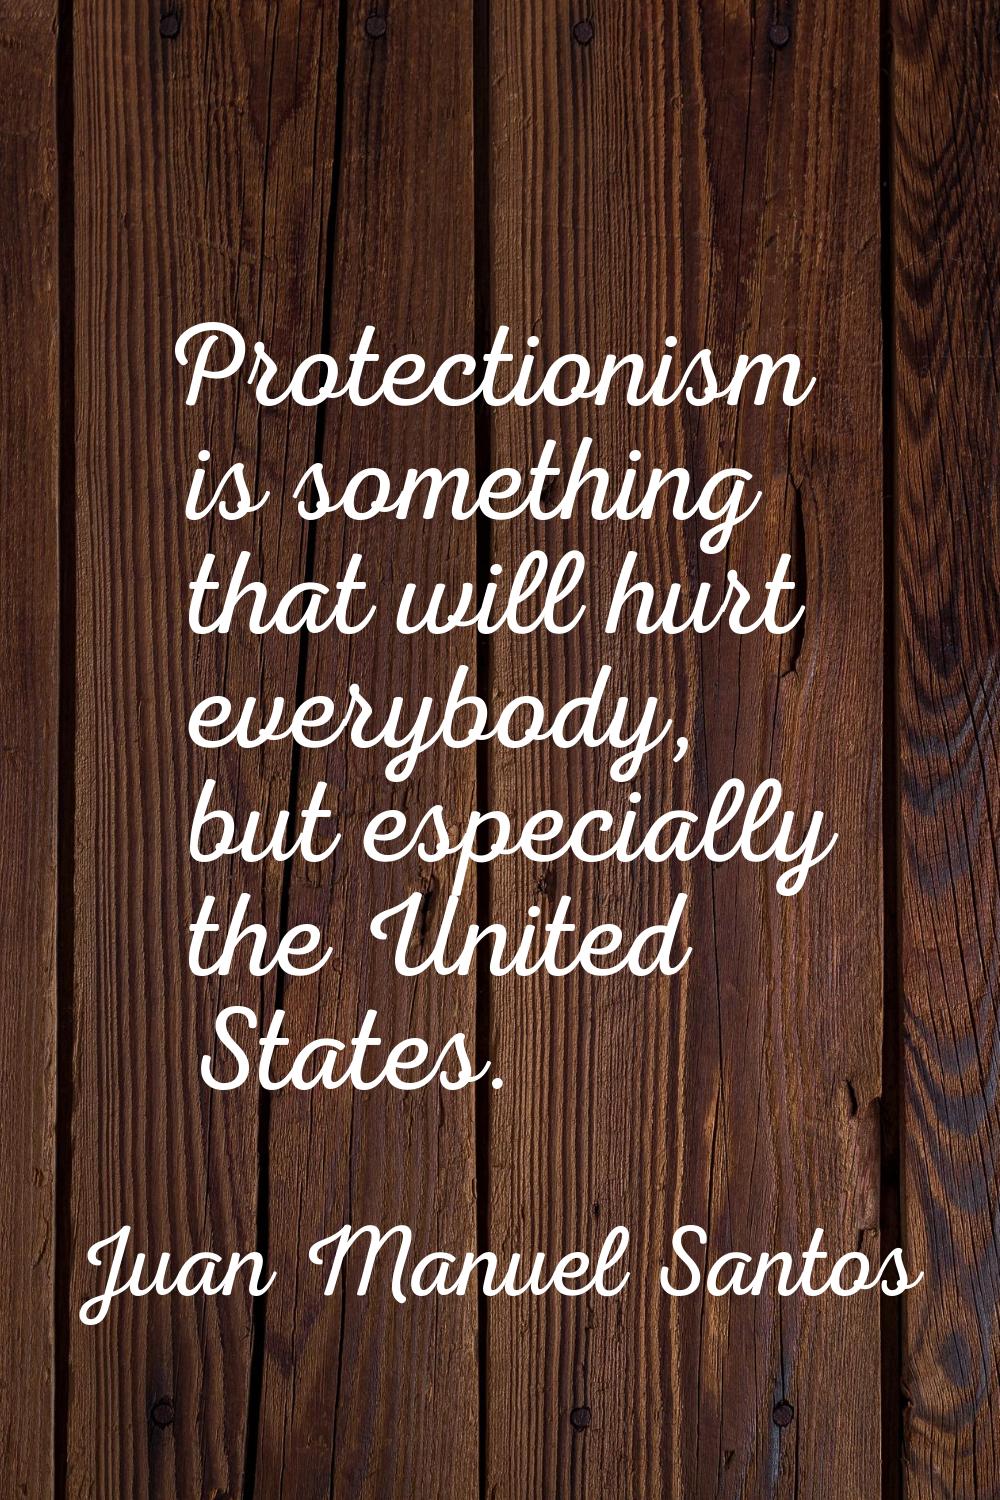 Protectionism is something that will hurt everybody, but especially the United States.